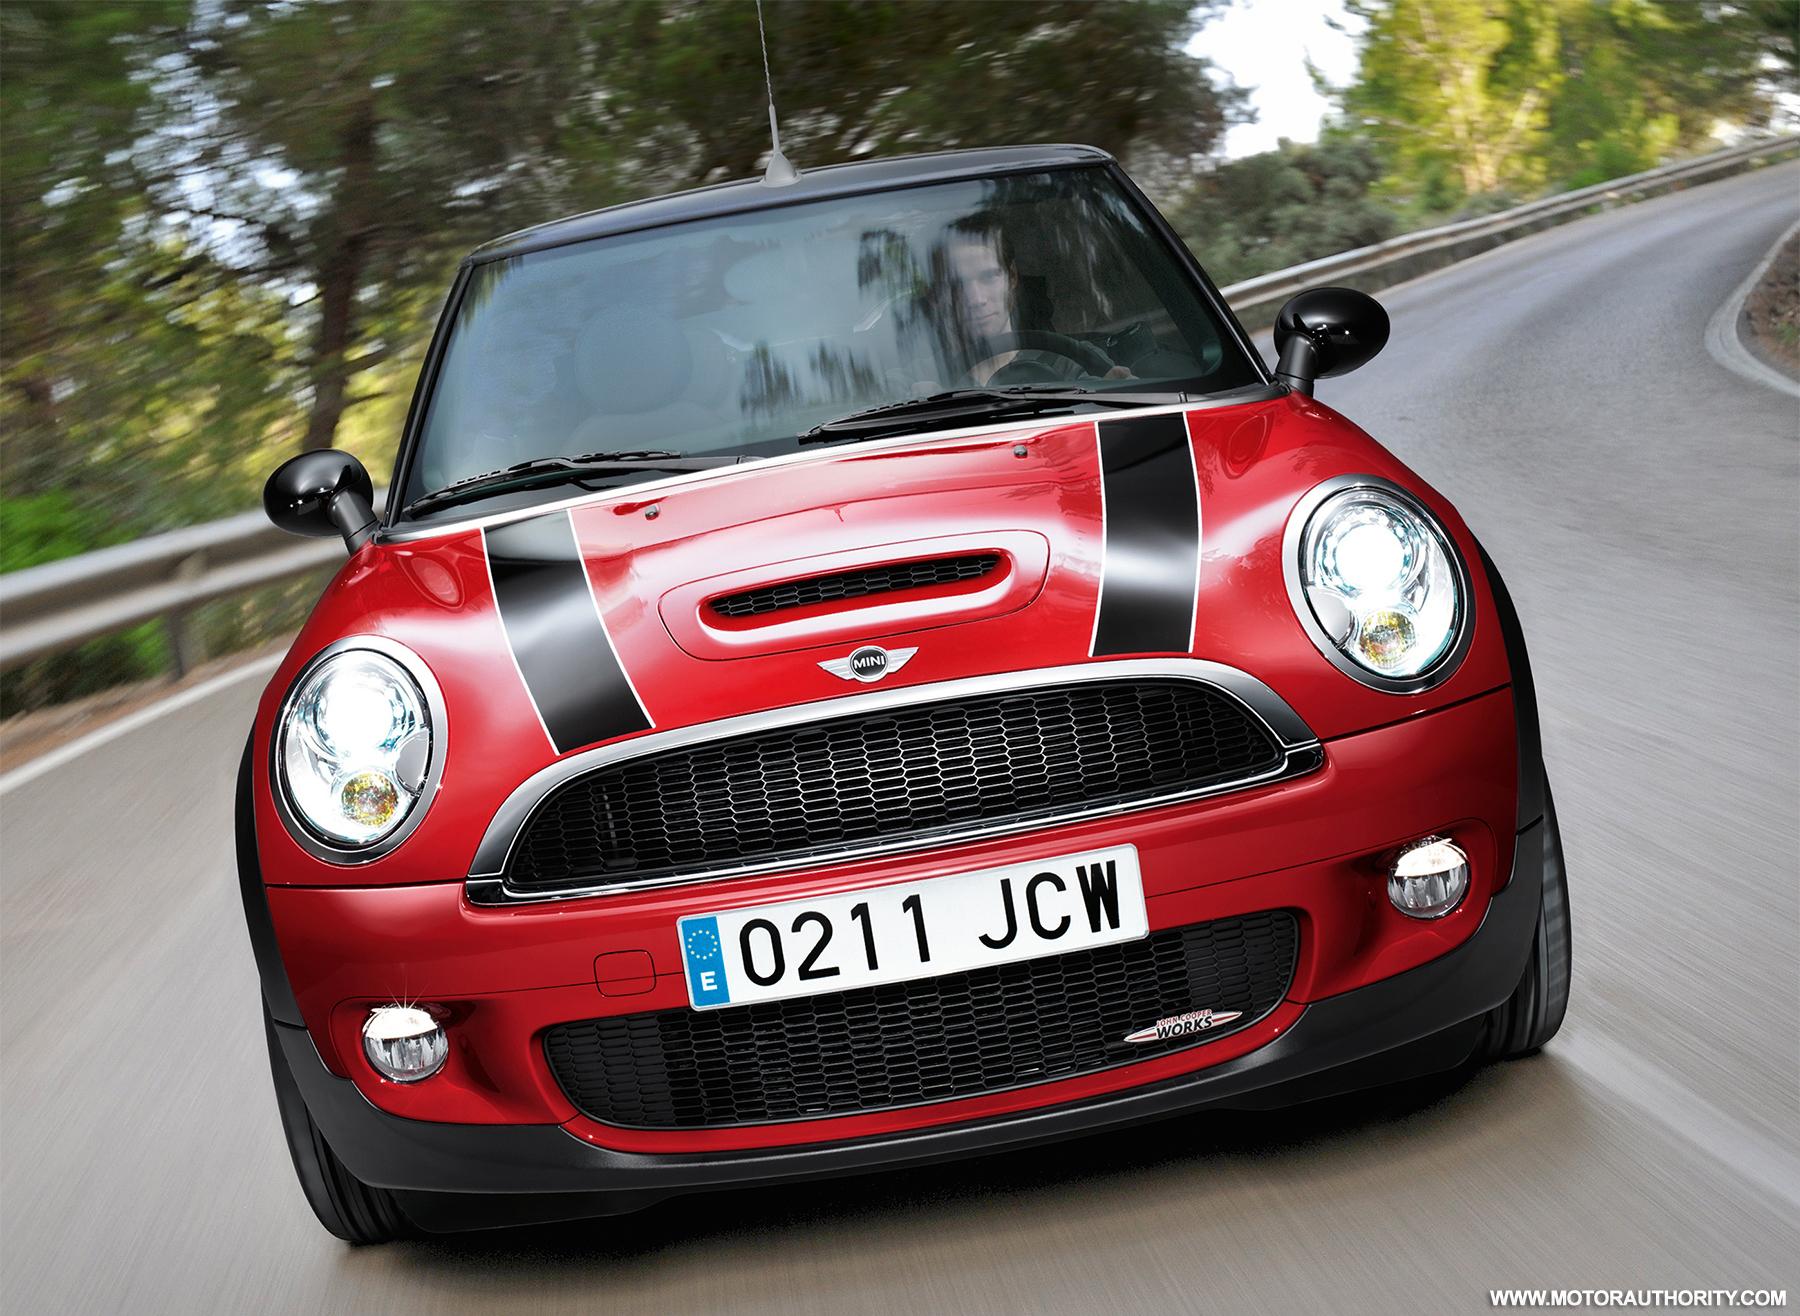 Mini Cooper S Clubman Jcw Models Recalled For